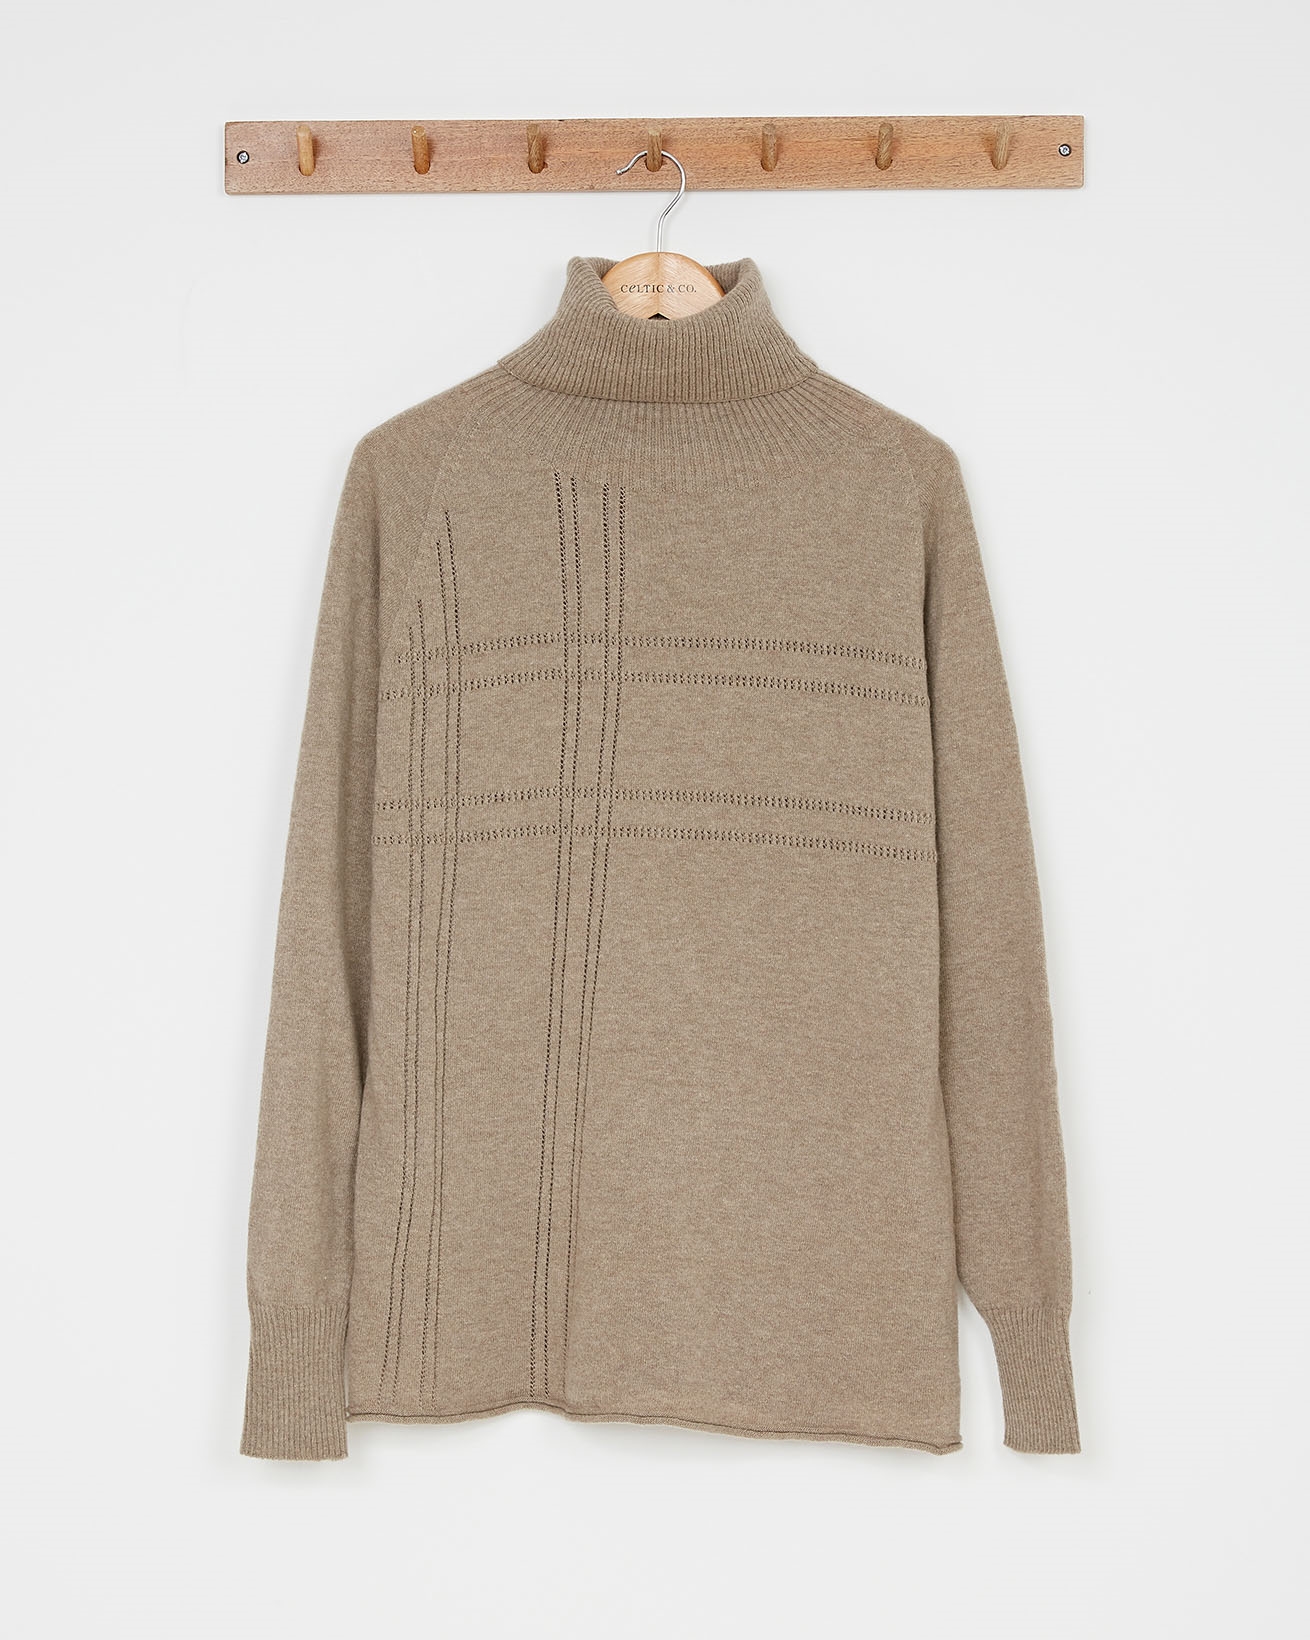 Pointelle Detail Geelong Slouch Roll Neck / Mushroom / Small